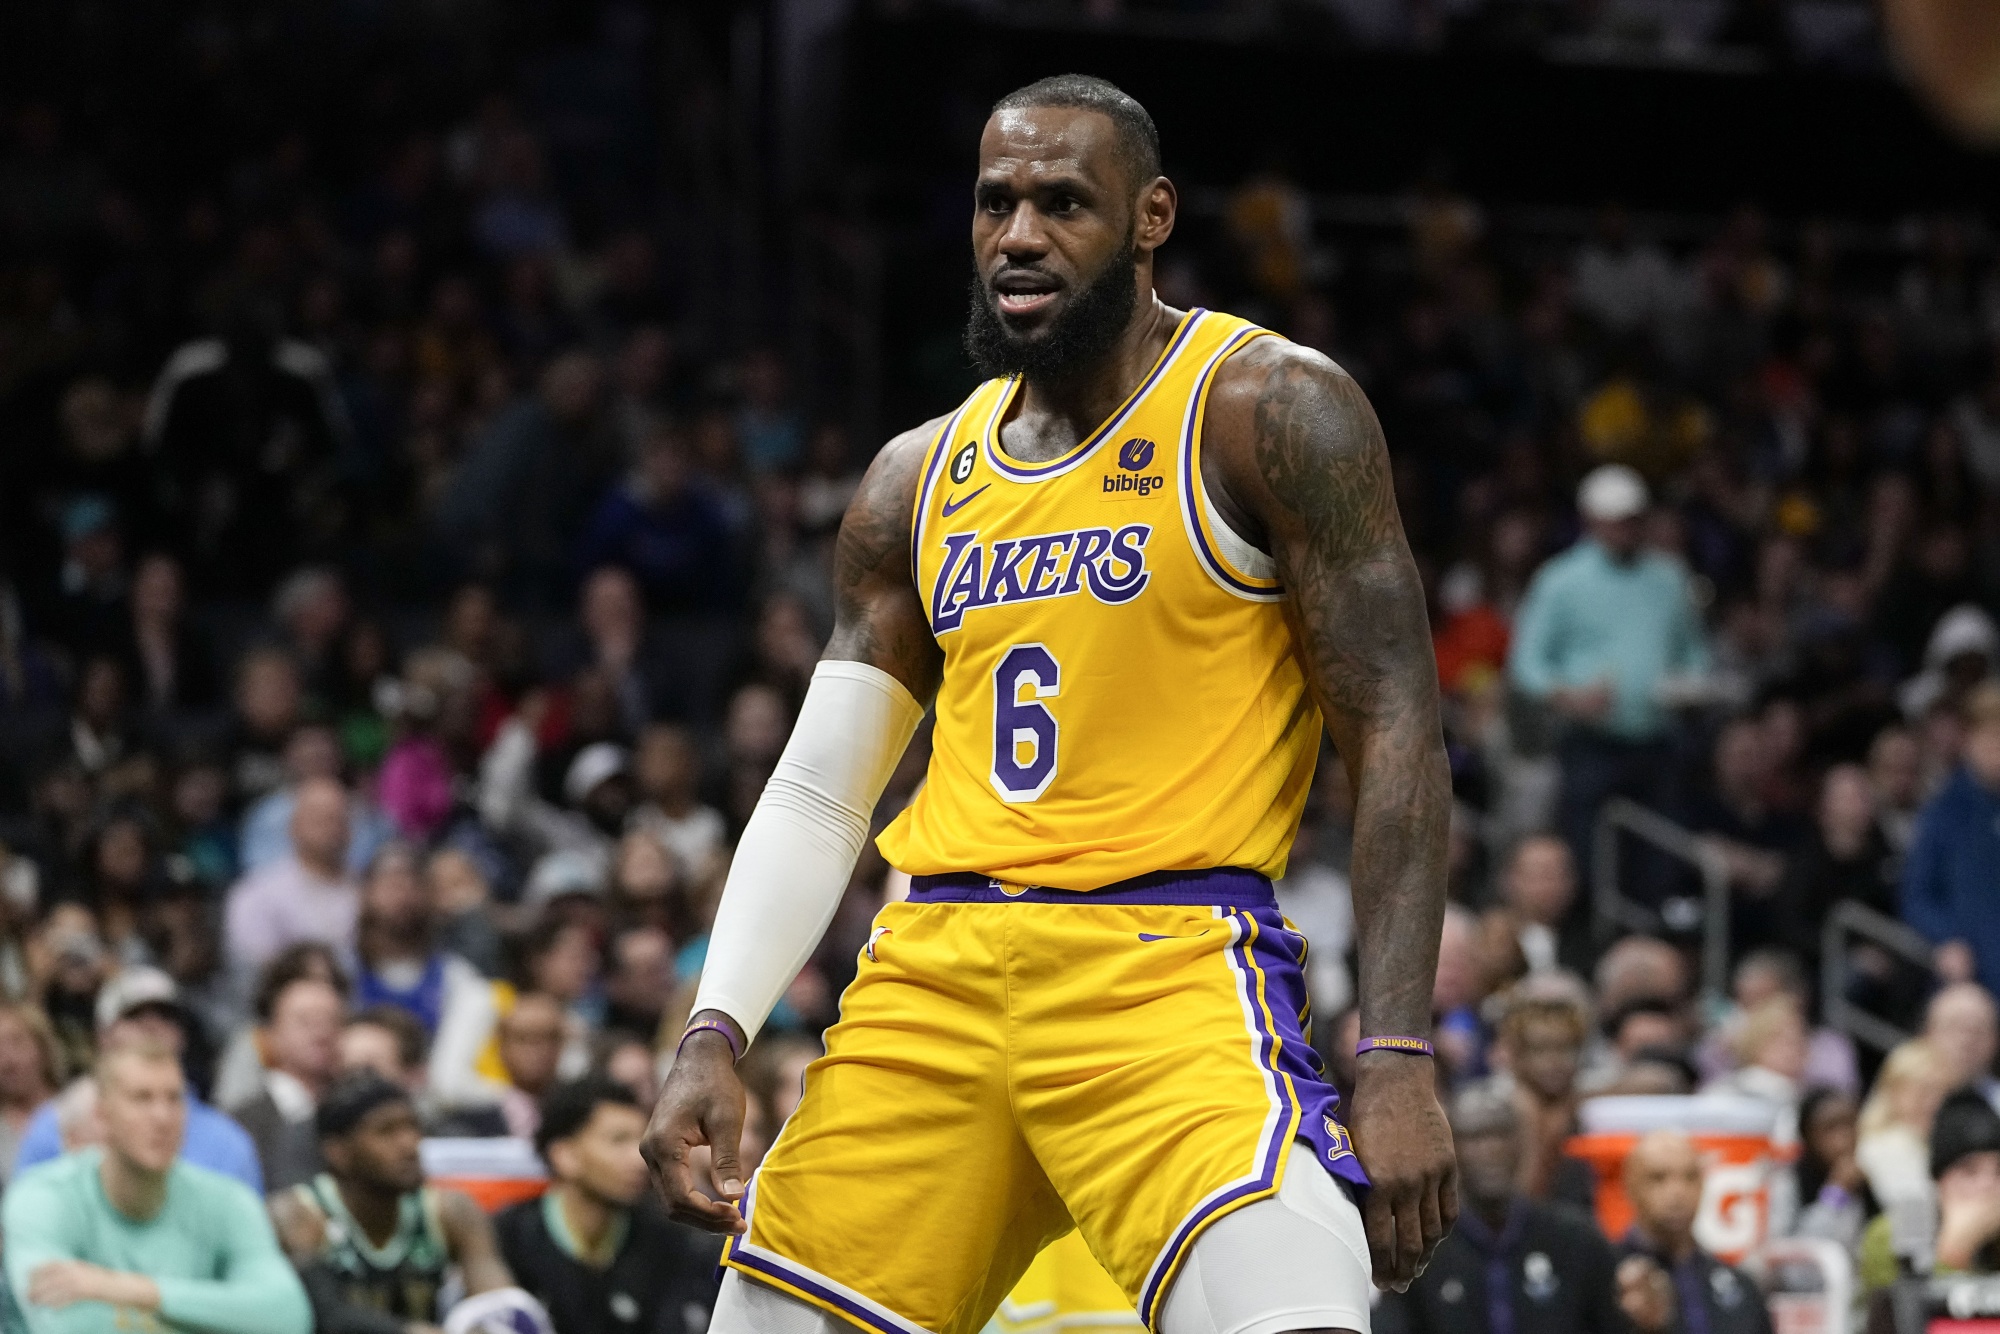 Kareem Abdul-Jabbar reflects on strained relations with LeBron